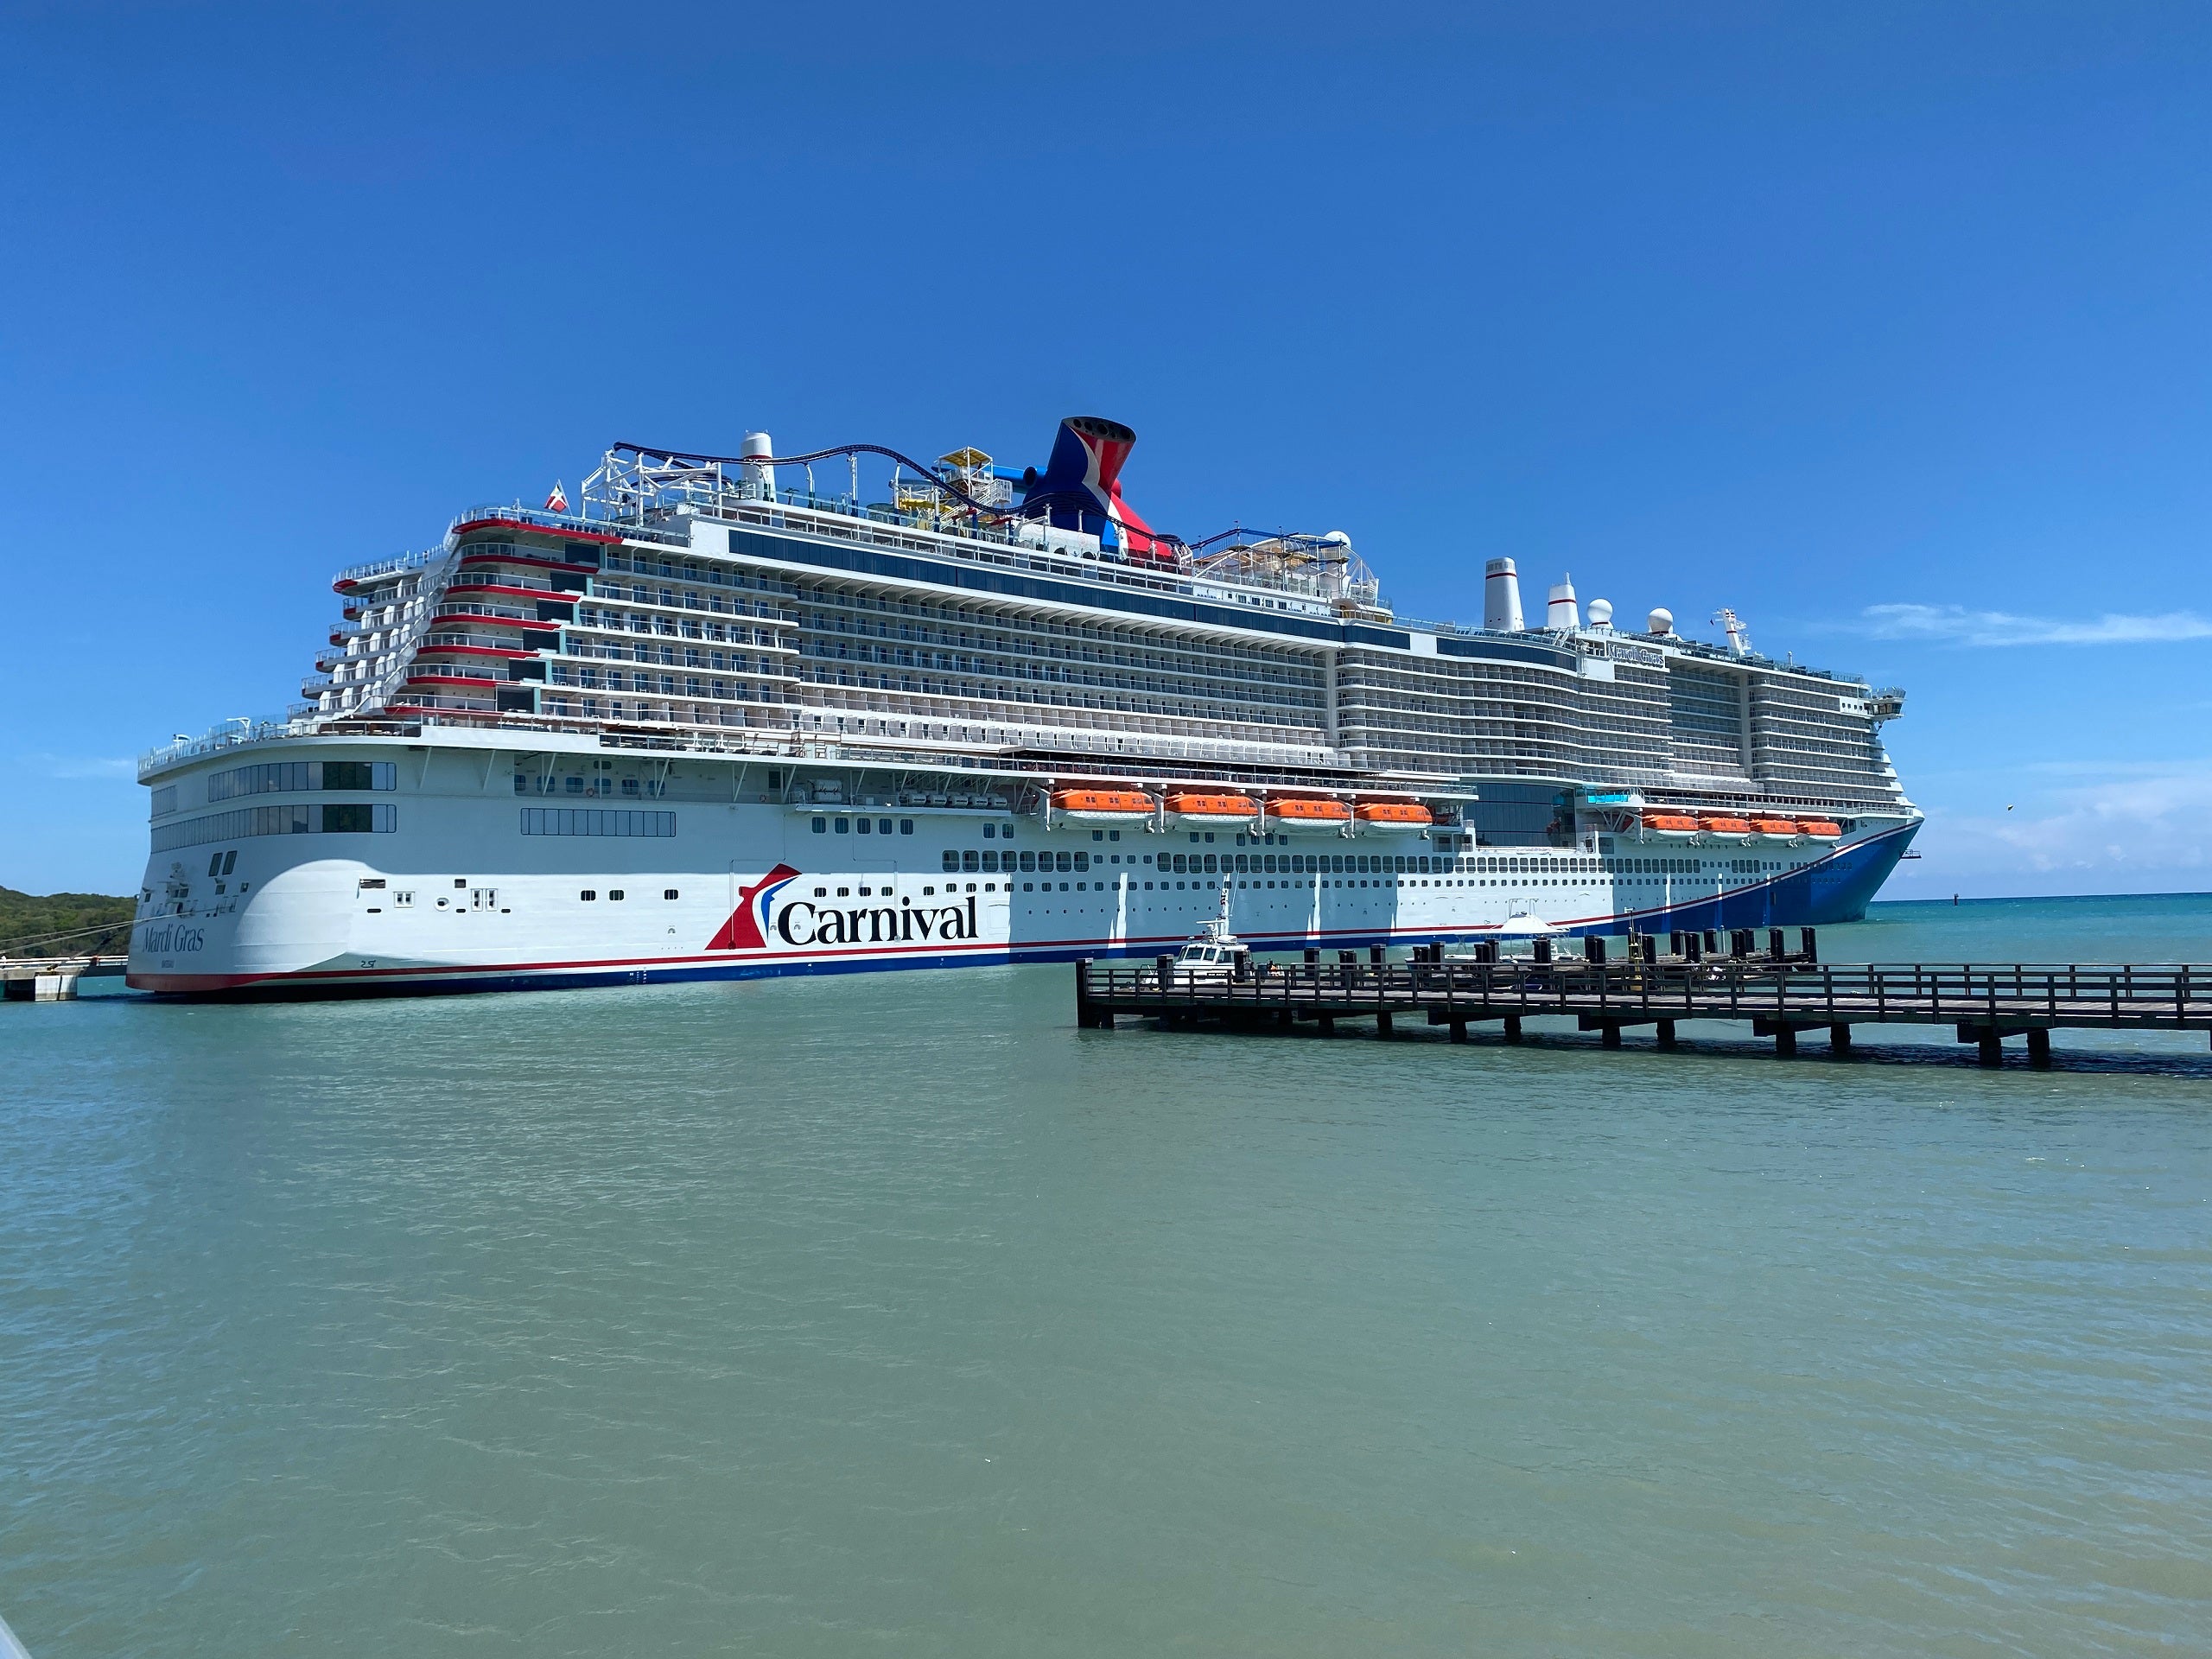 Photo Tour of Carnival Vista, Carnival Cruise Line's Newest Cruise Ship